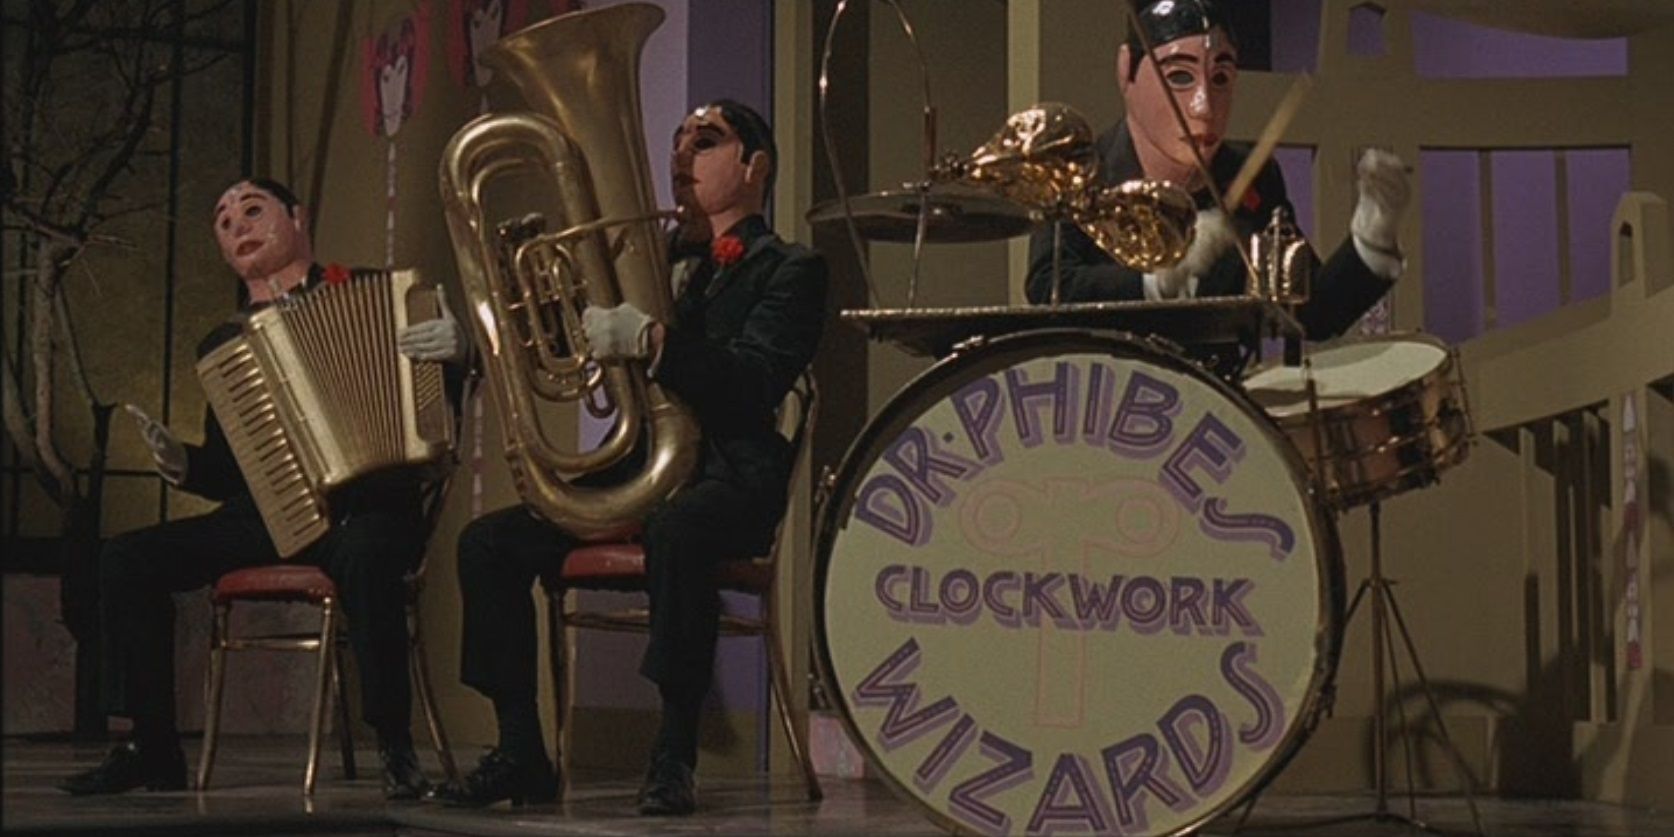 The Abominable Phibes Clockwork Wizards Band